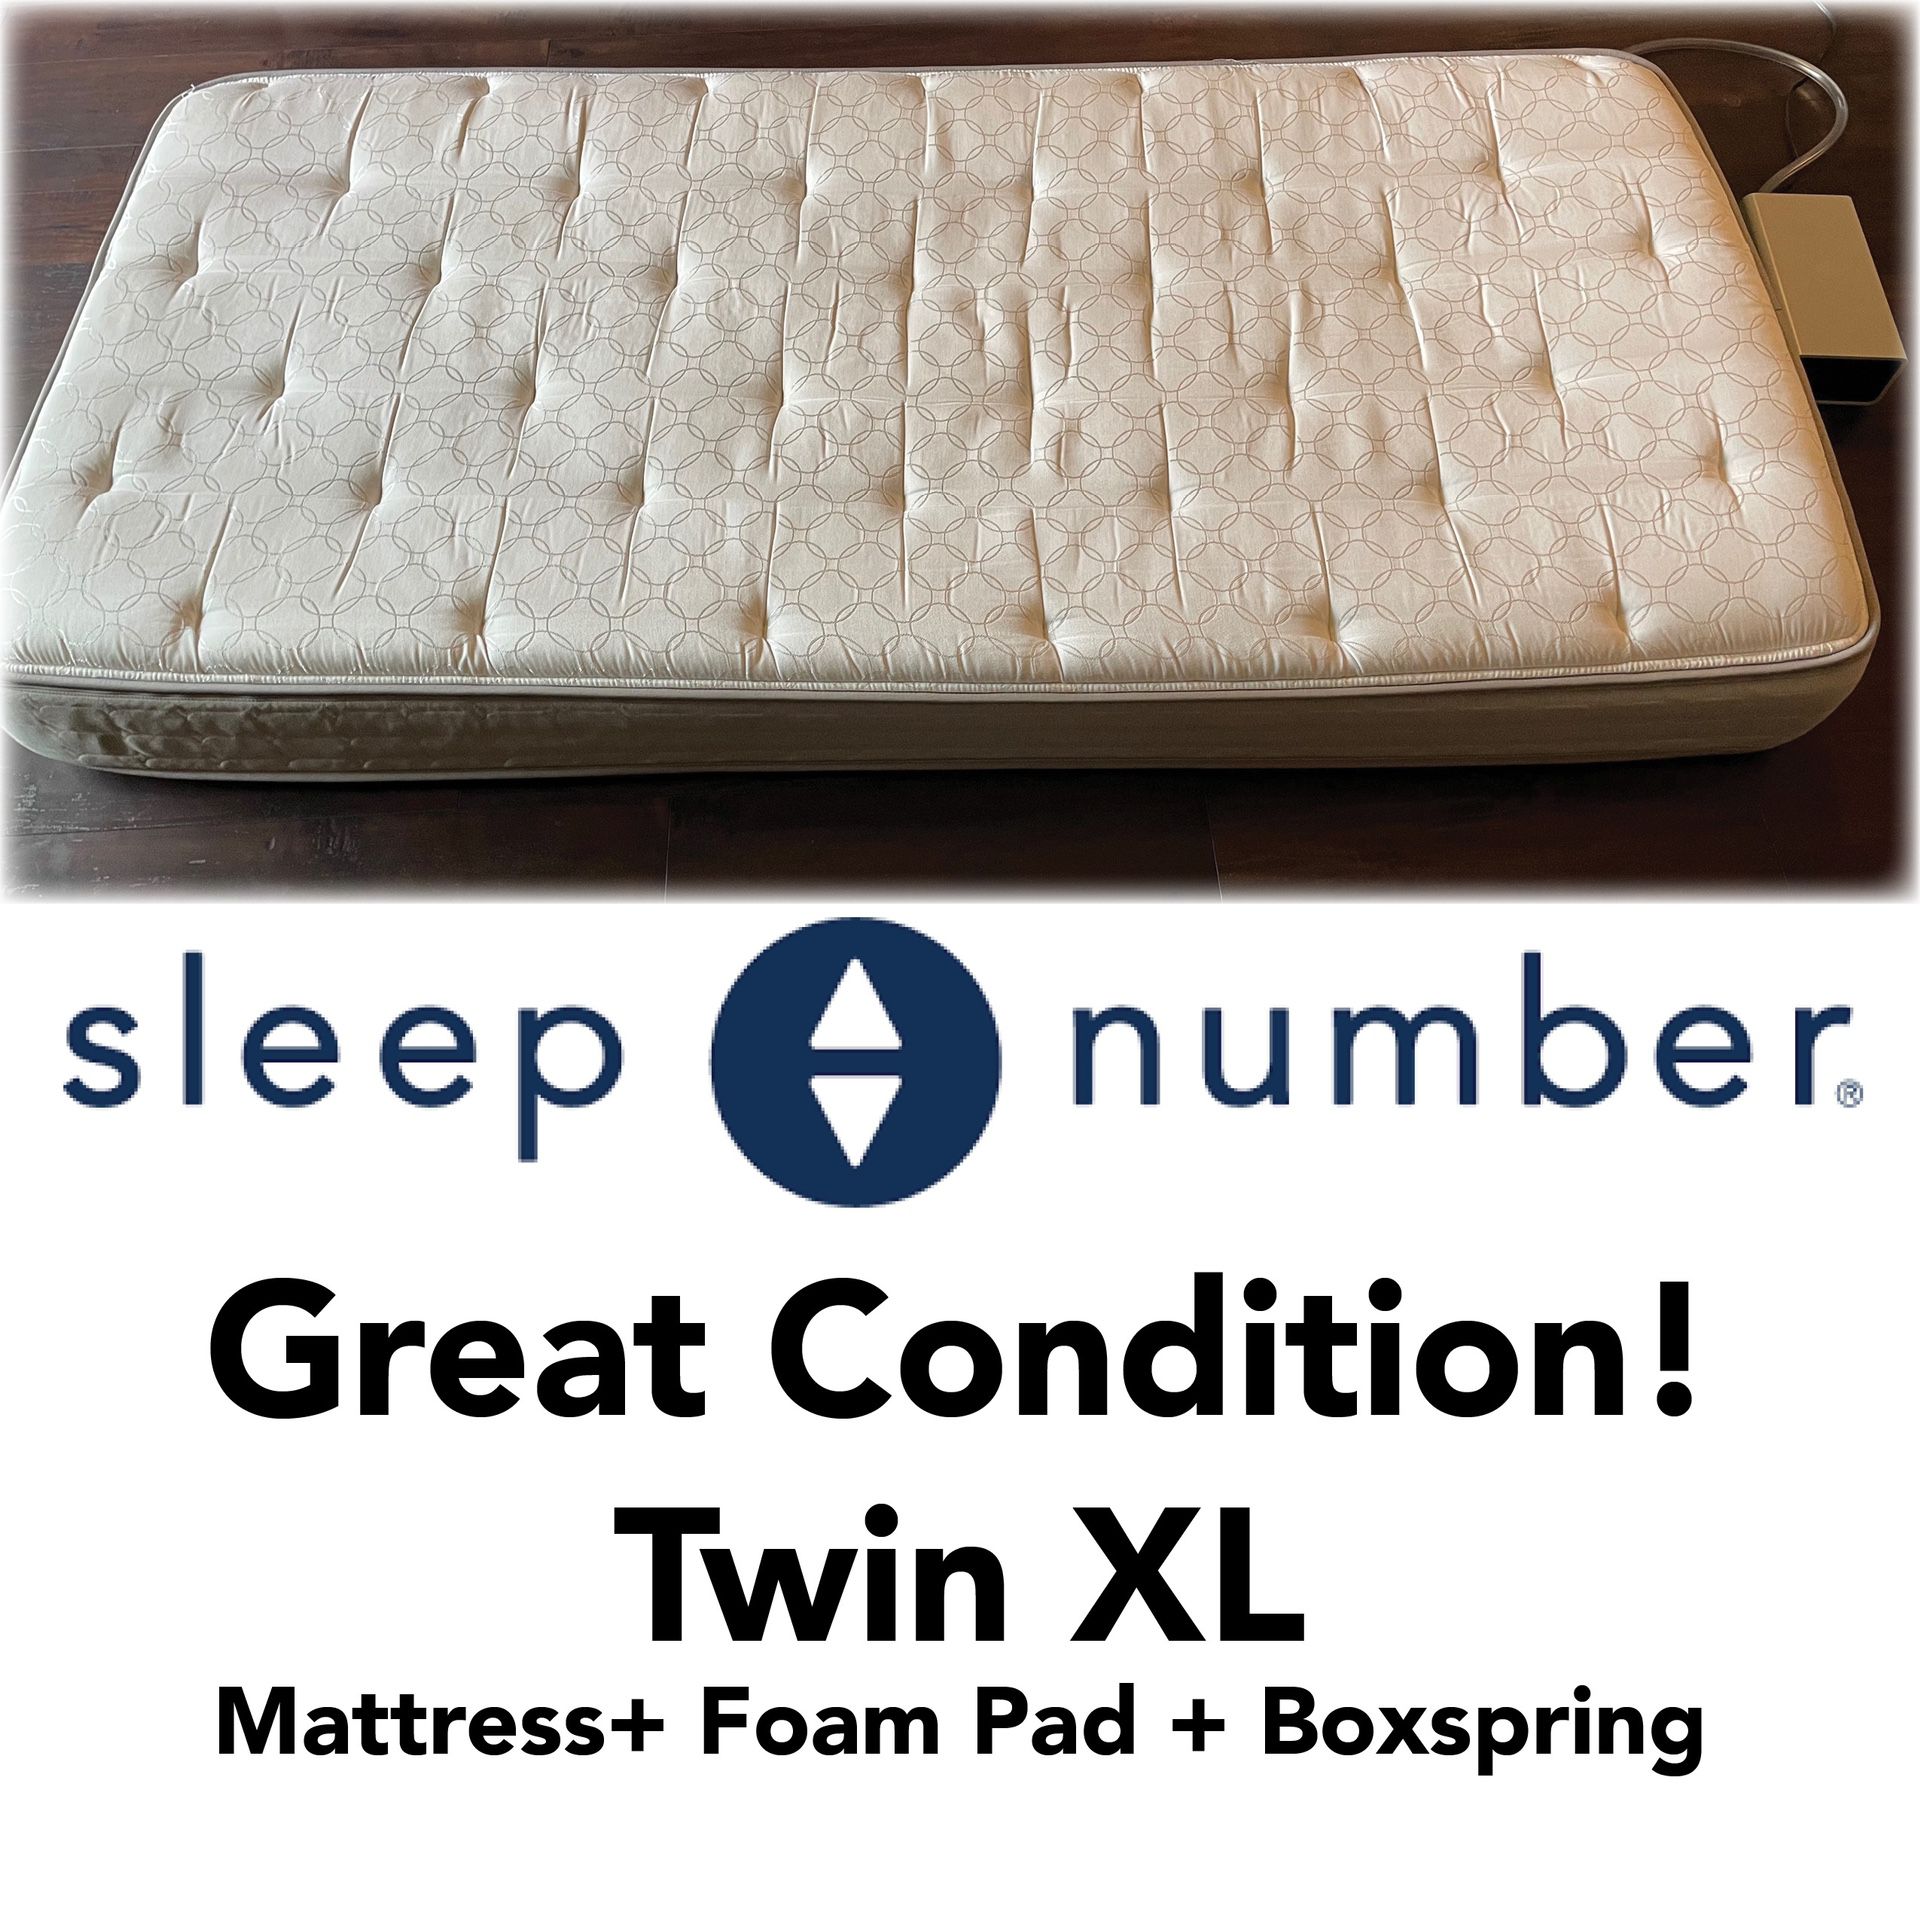 Sleep Number Mattress With Foundation, Frame, & Memory Foam